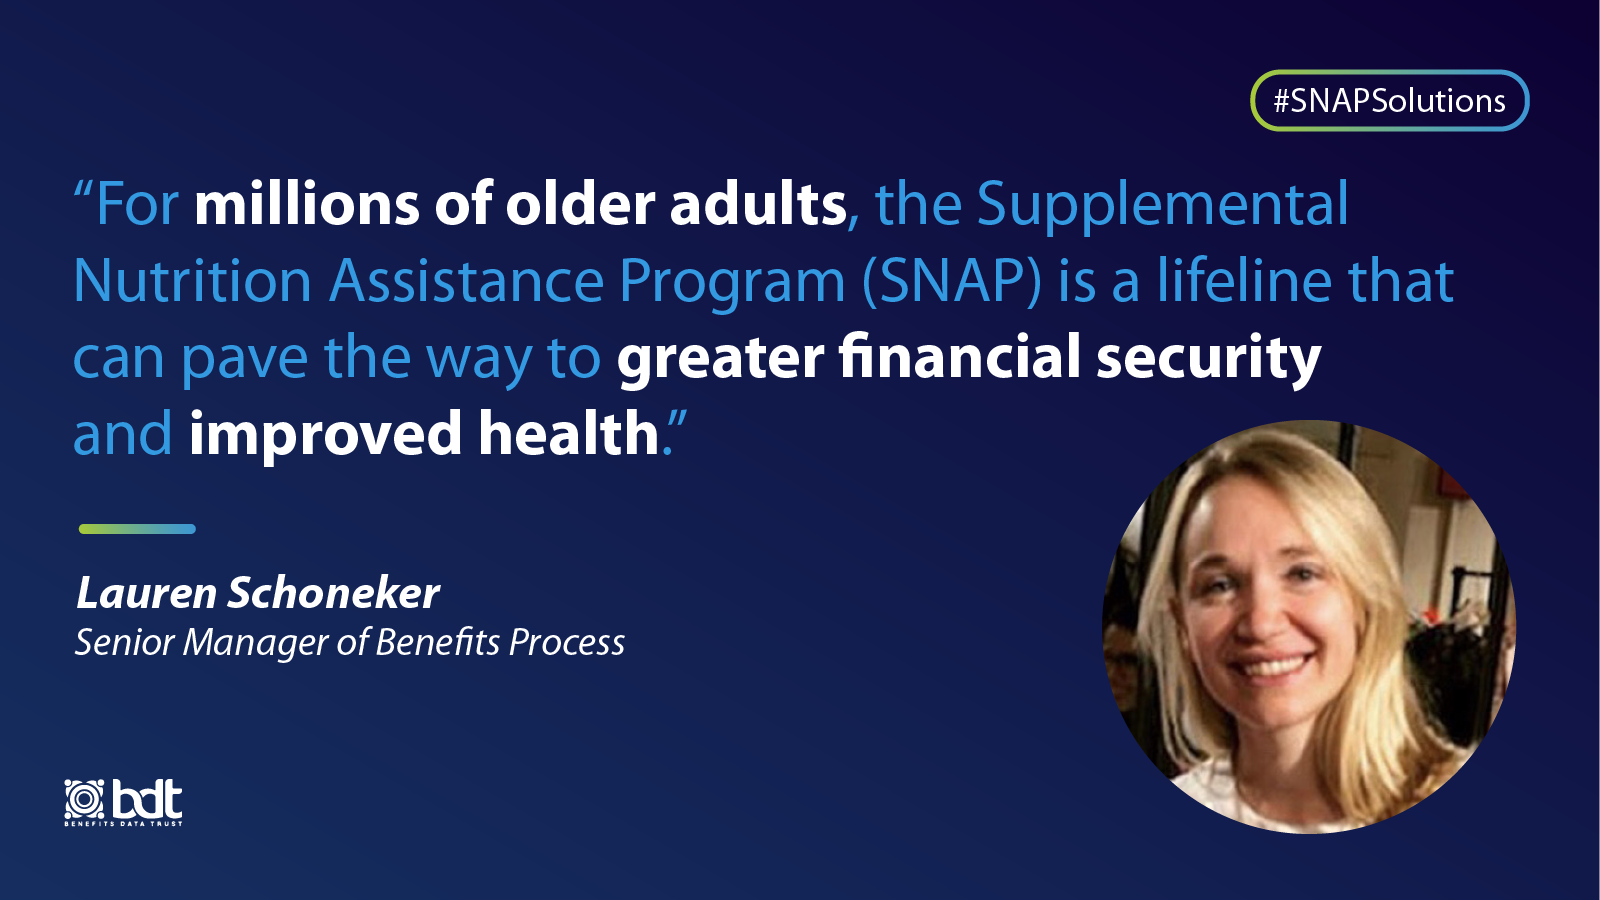 "For millions of older adults, the Supplemental Nutrition Assistance Program (SNAP) is a lifeline that can pave the way to greater financial security and improved health." – Lauren Schoneker